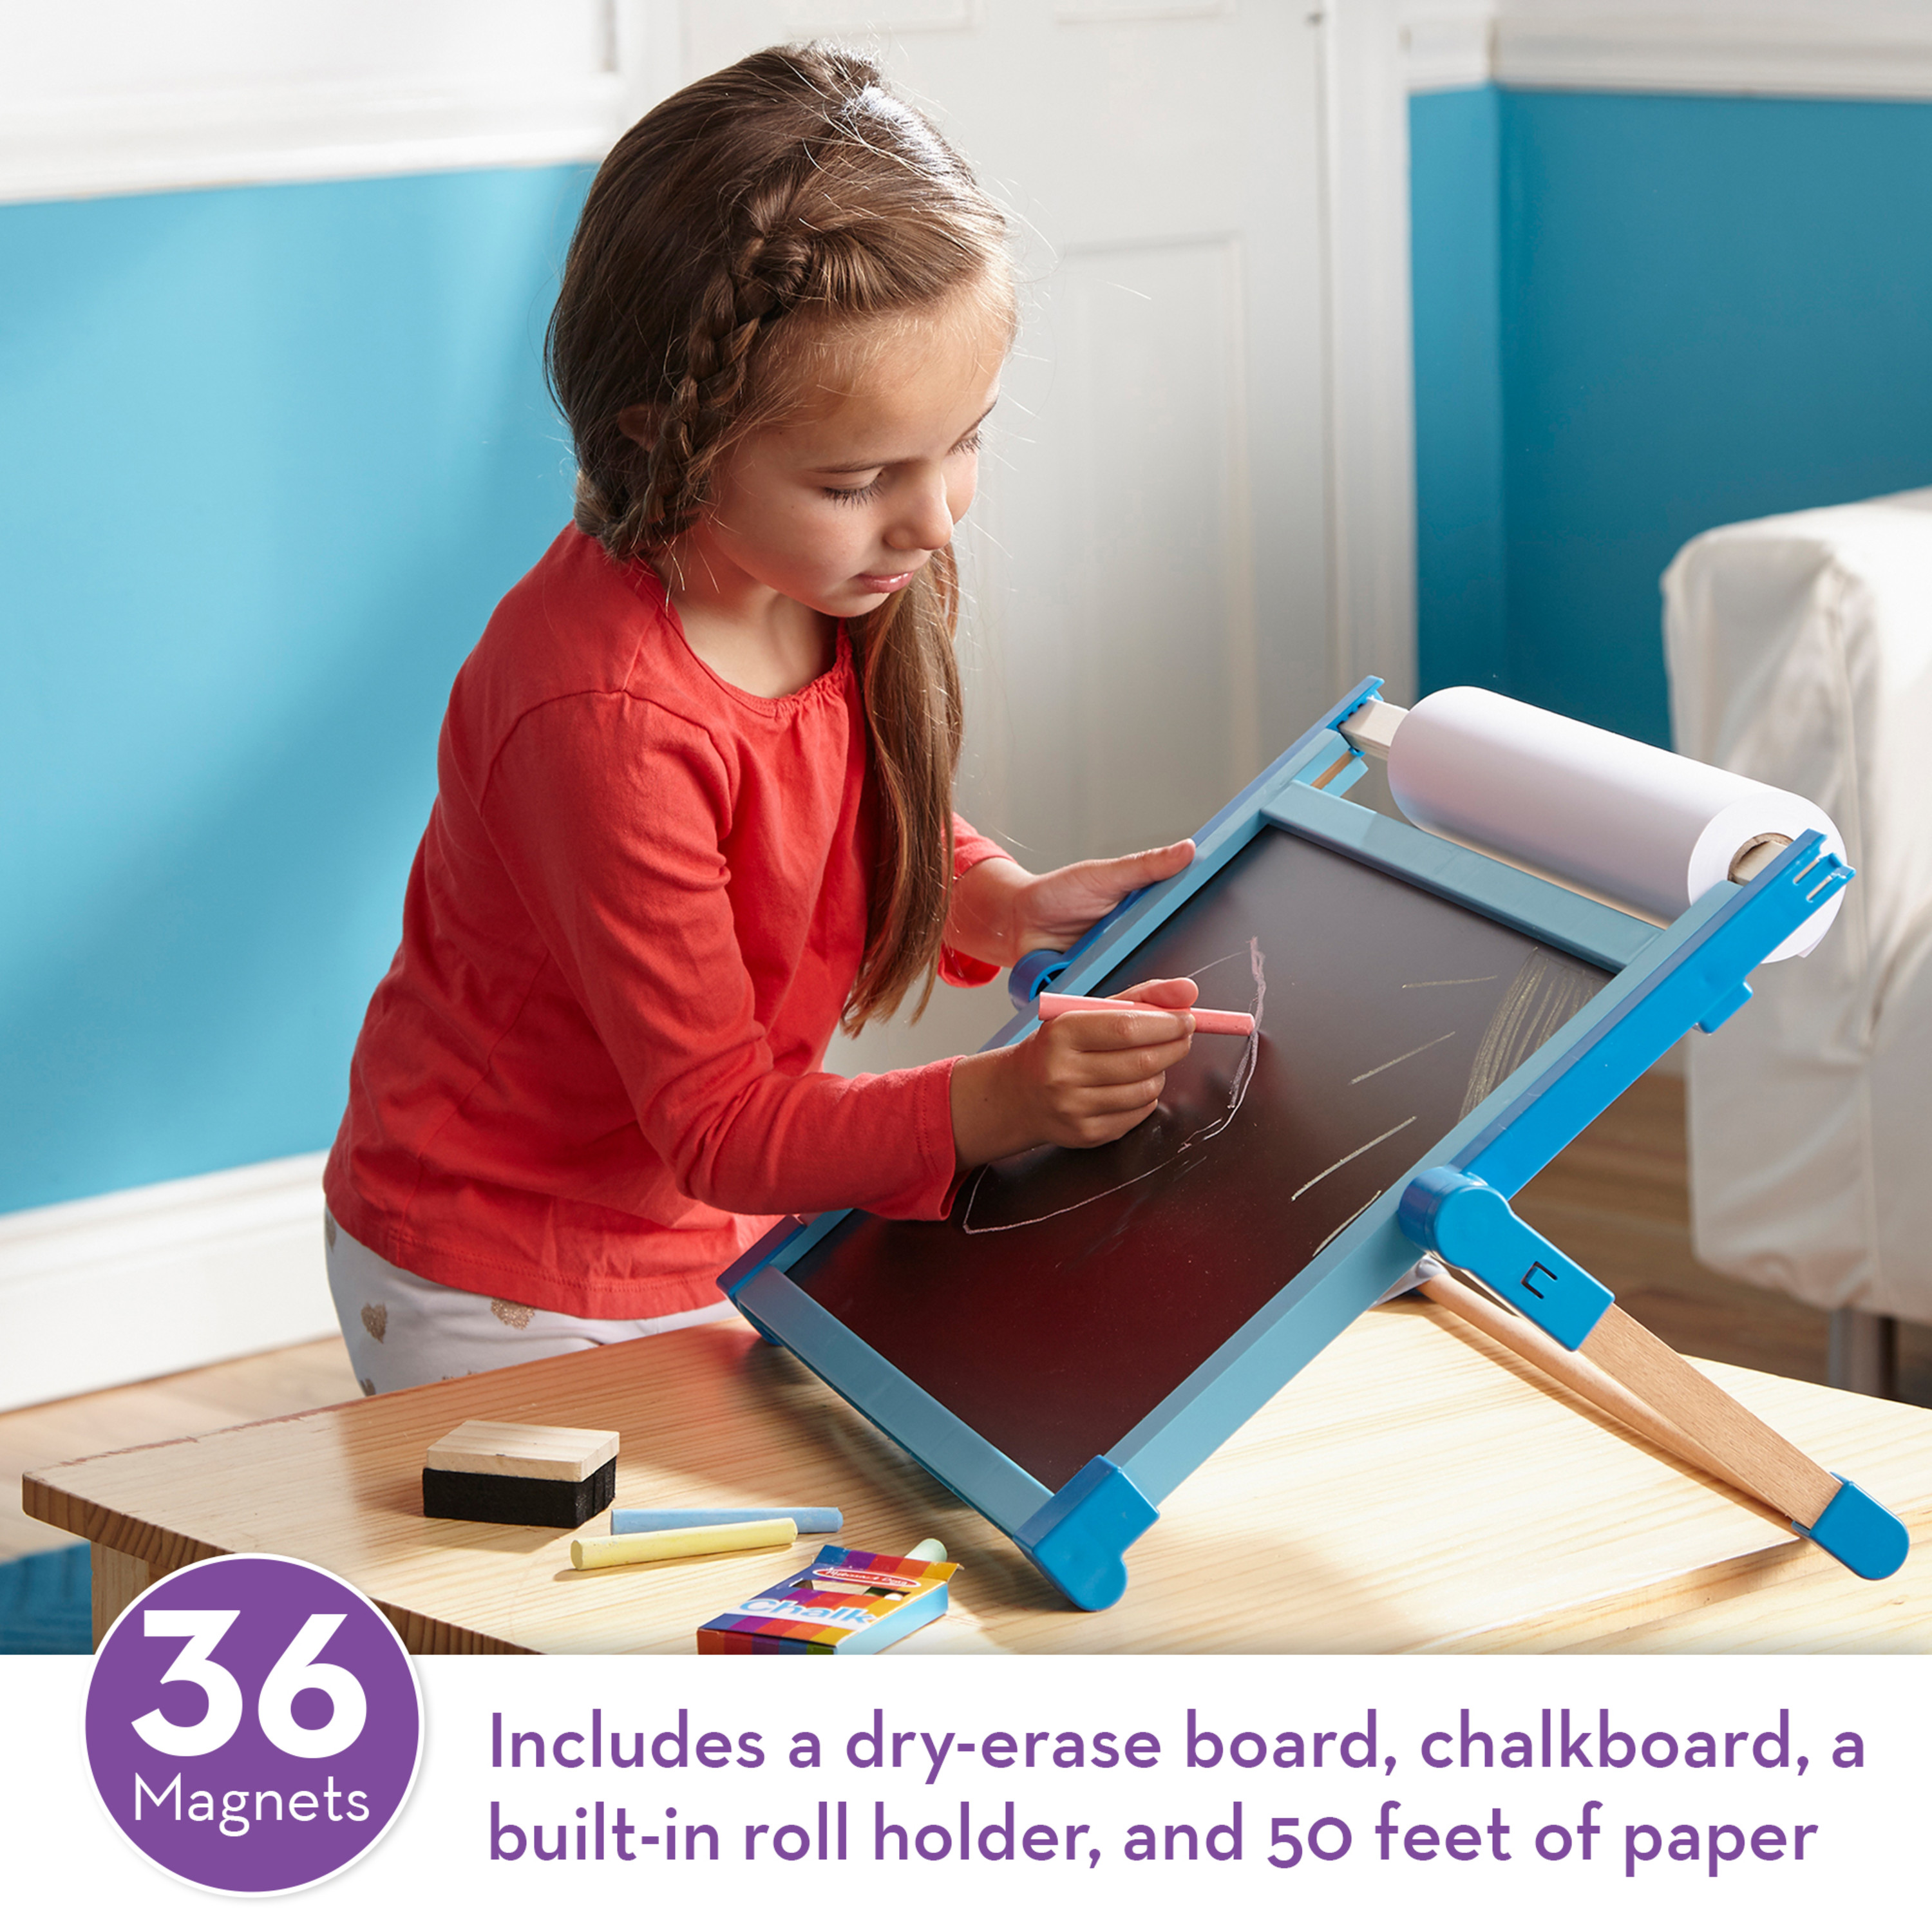 Melissa & Doug Double-Sided Magnetic Tabletop Art Easel - Dry-Erase Board and Chalkboard - FSC Certified - image 3 of 10